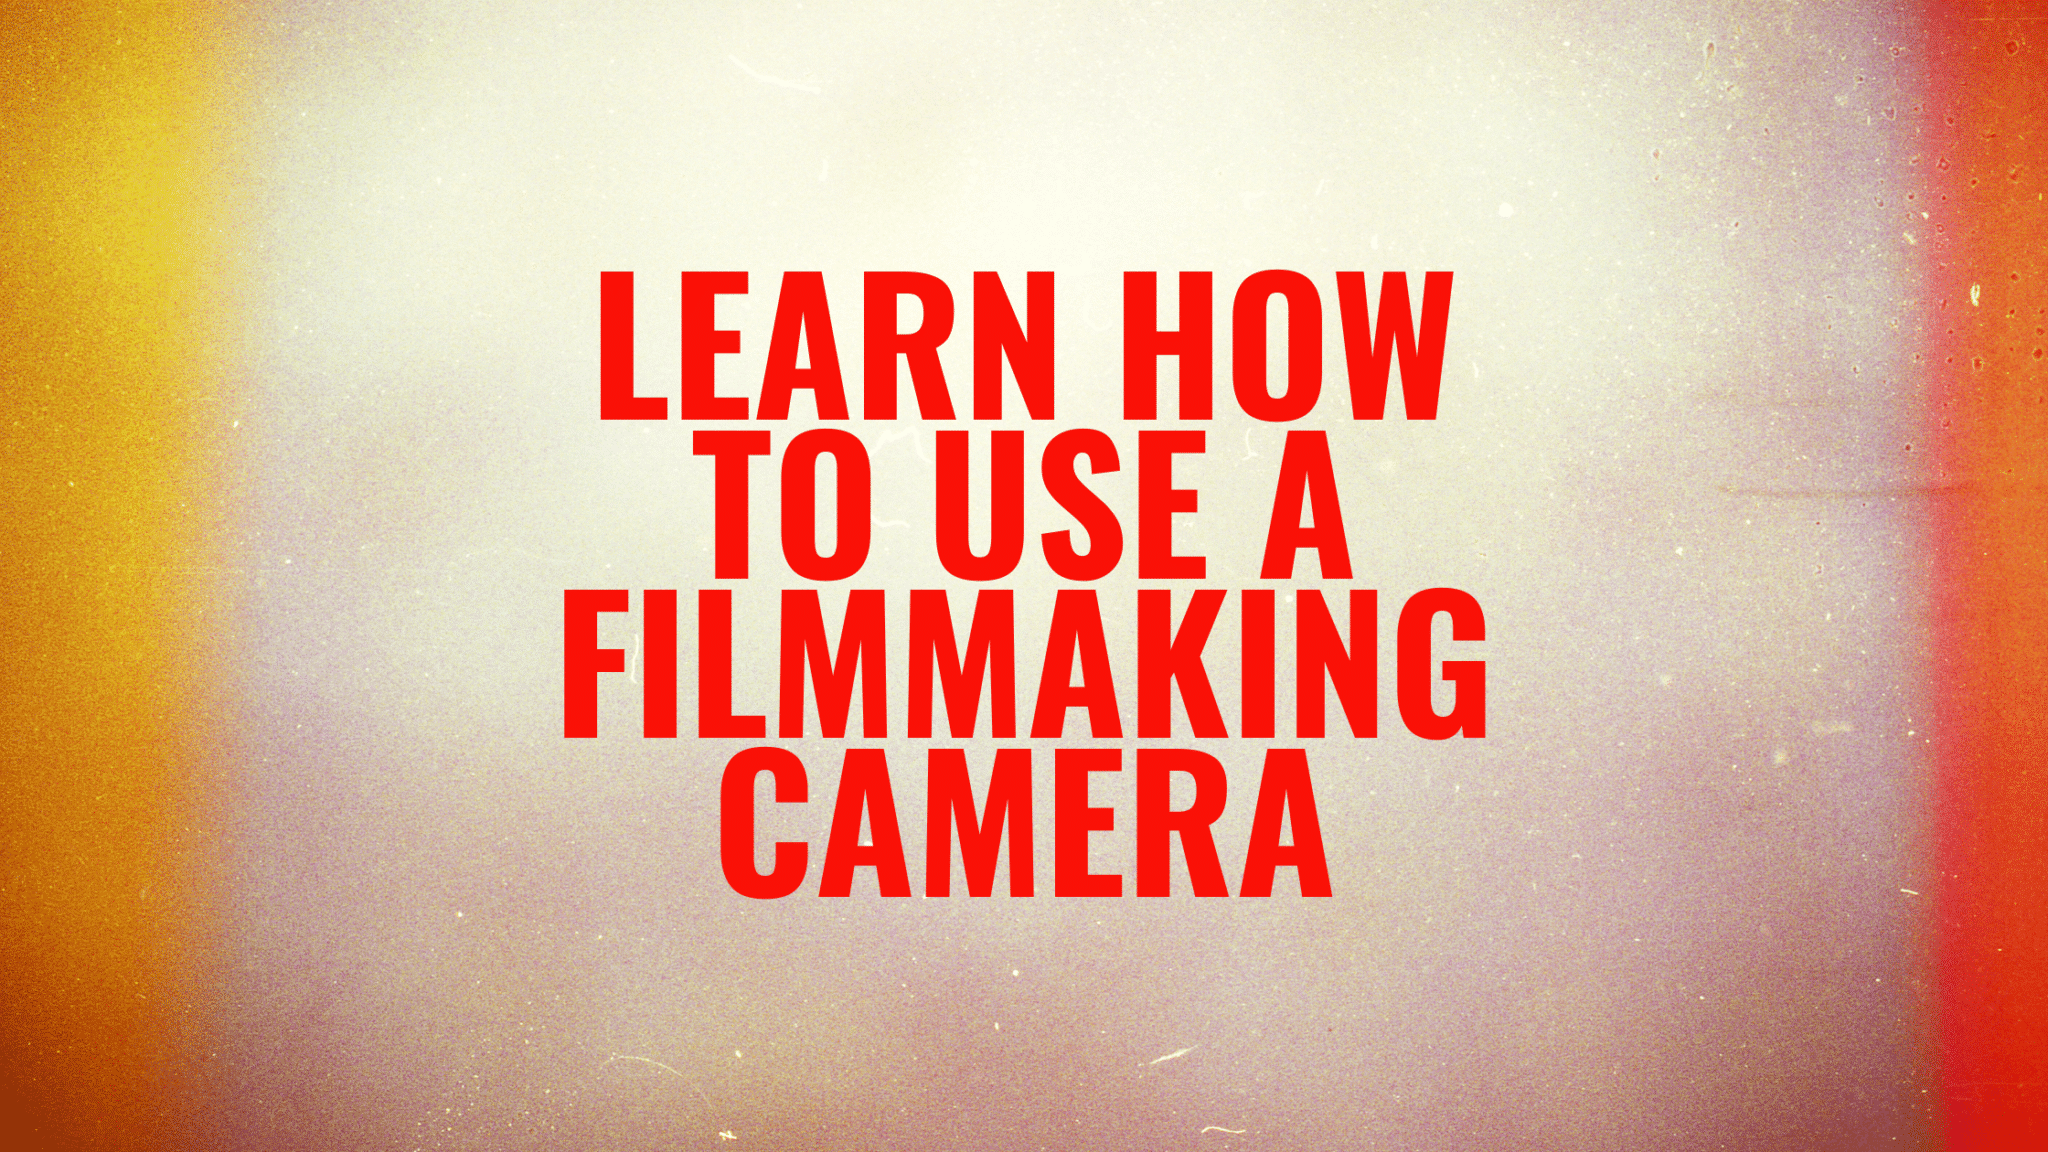 Text that says "Learn how to use a filmmaking camera"